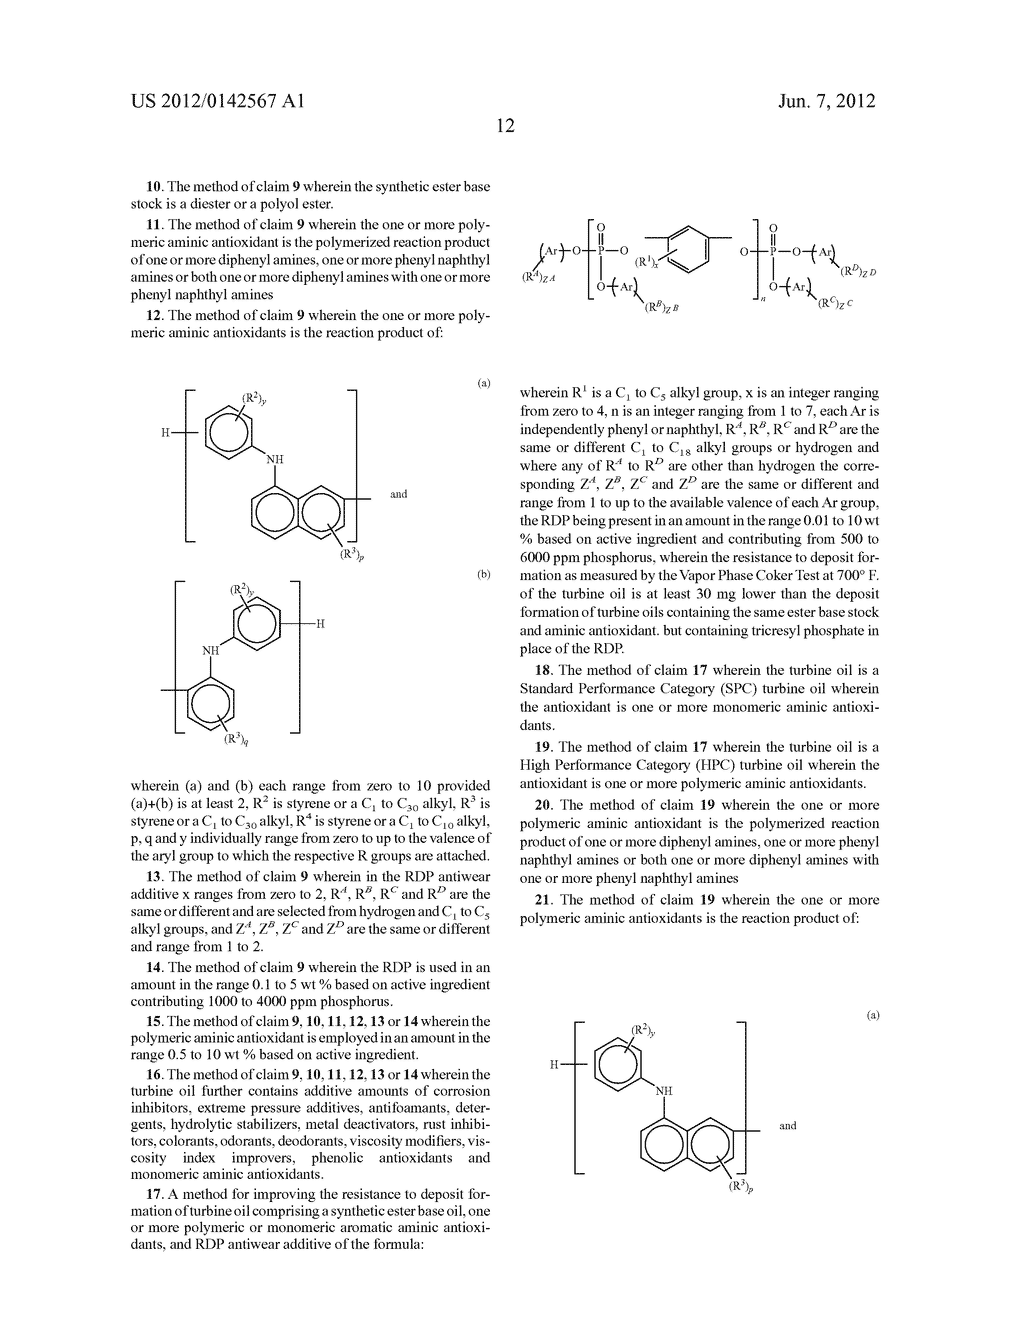 METHOD FOR MAINTAINING ANTIWEAR PERFORMANCE OF TURBINE OILS CONTAINING     POLYMERIZED AMINE ANTIOXIDANTS AND FOR IMPROVING THE DEPOSIT FORMATION     RESISTANCE PERFORMANCE OF TURBINE OILS CONTAINING MONOMERIC AND/OR     POLYMERIC ANTIOXIDANTS - diagram, schematic, and image 20